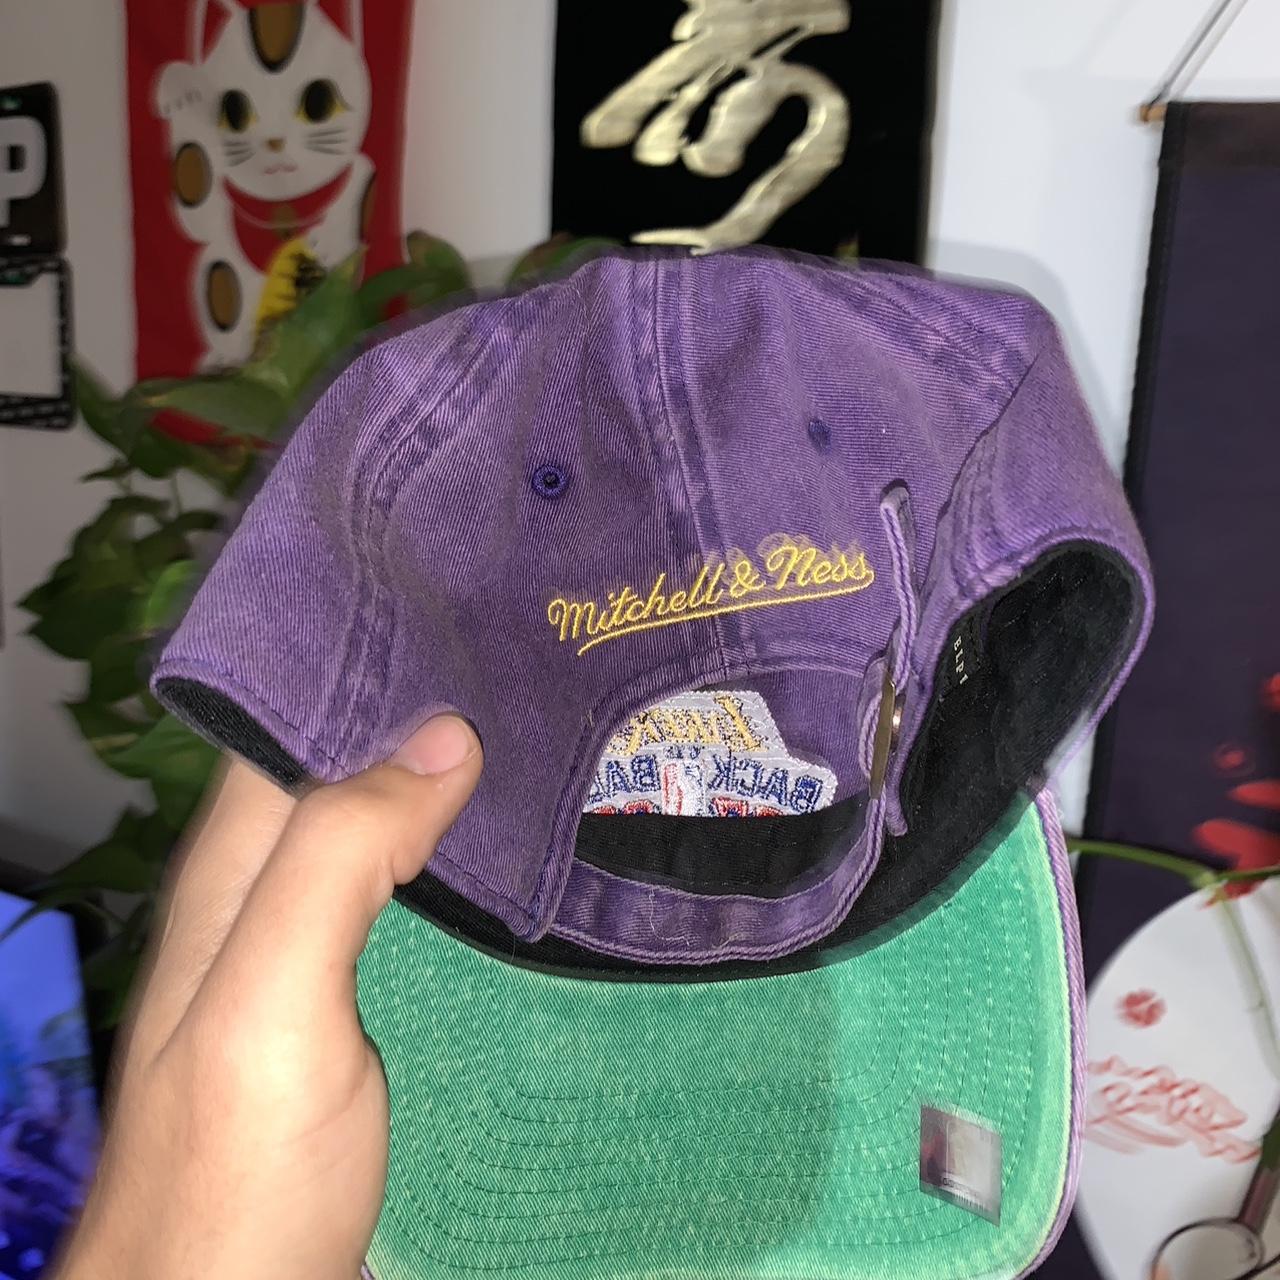 mitchell & ness lakers cap